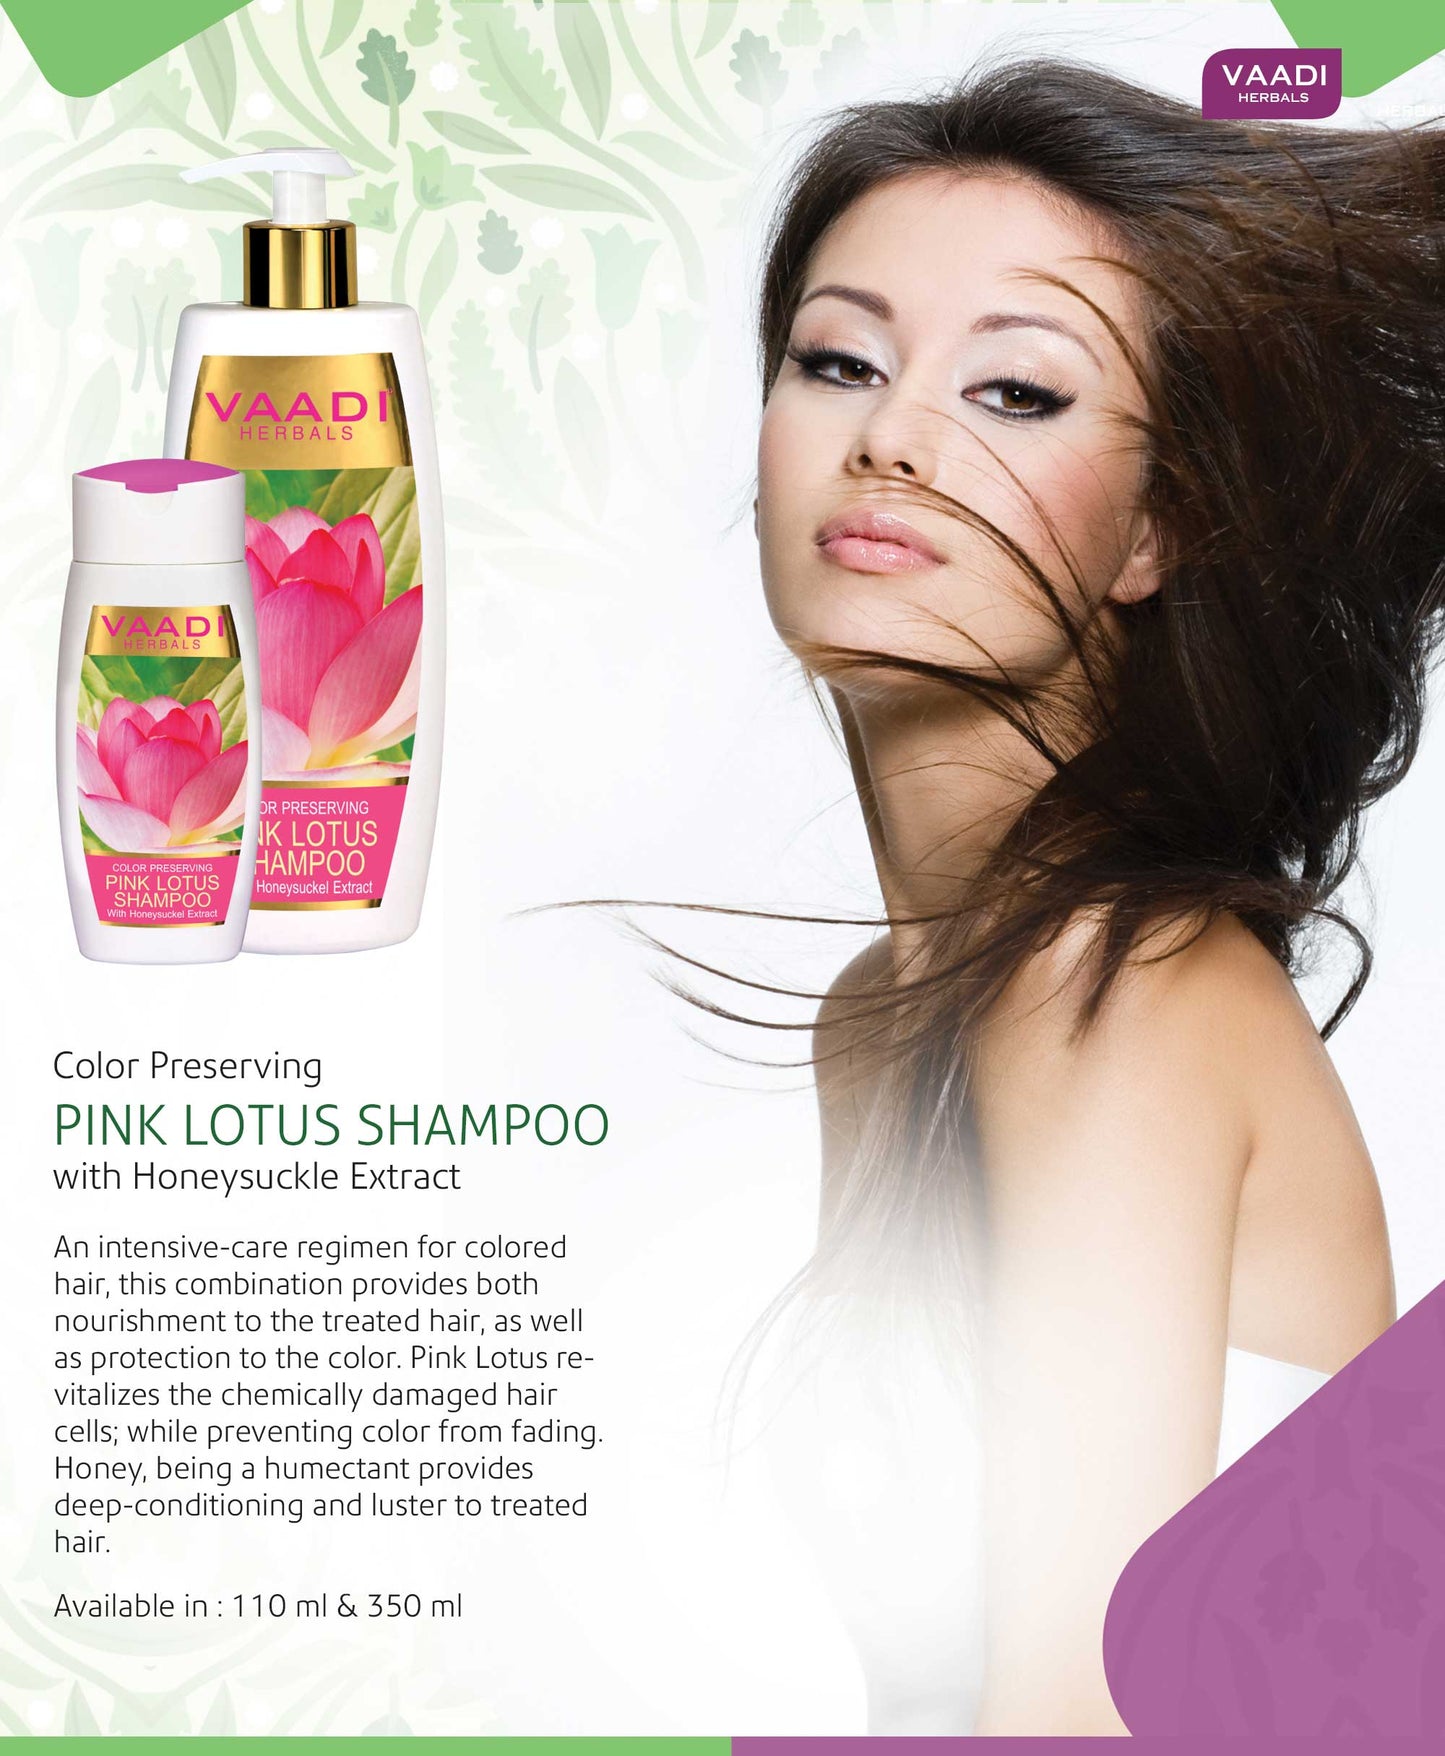 Color Preserving Organic Pink Lotus Shampoo with Honeysuckle Extract - Nourishes Treated Hair - Moisturizes Hair (3 x 110ml / 4 fl oz)